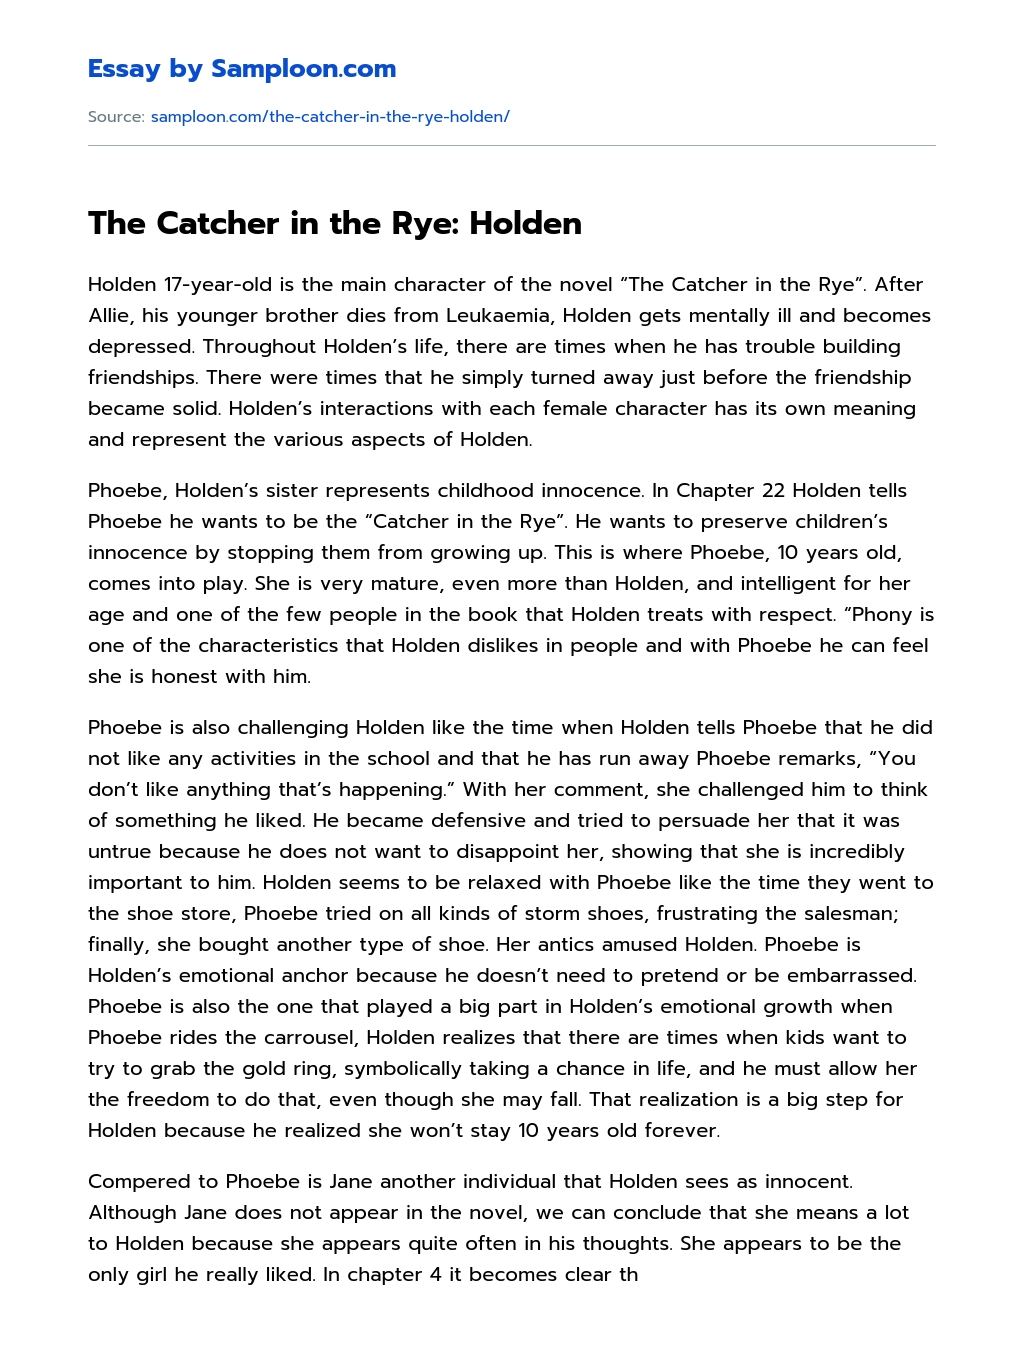 The Catcher in the Rye: Holden essay